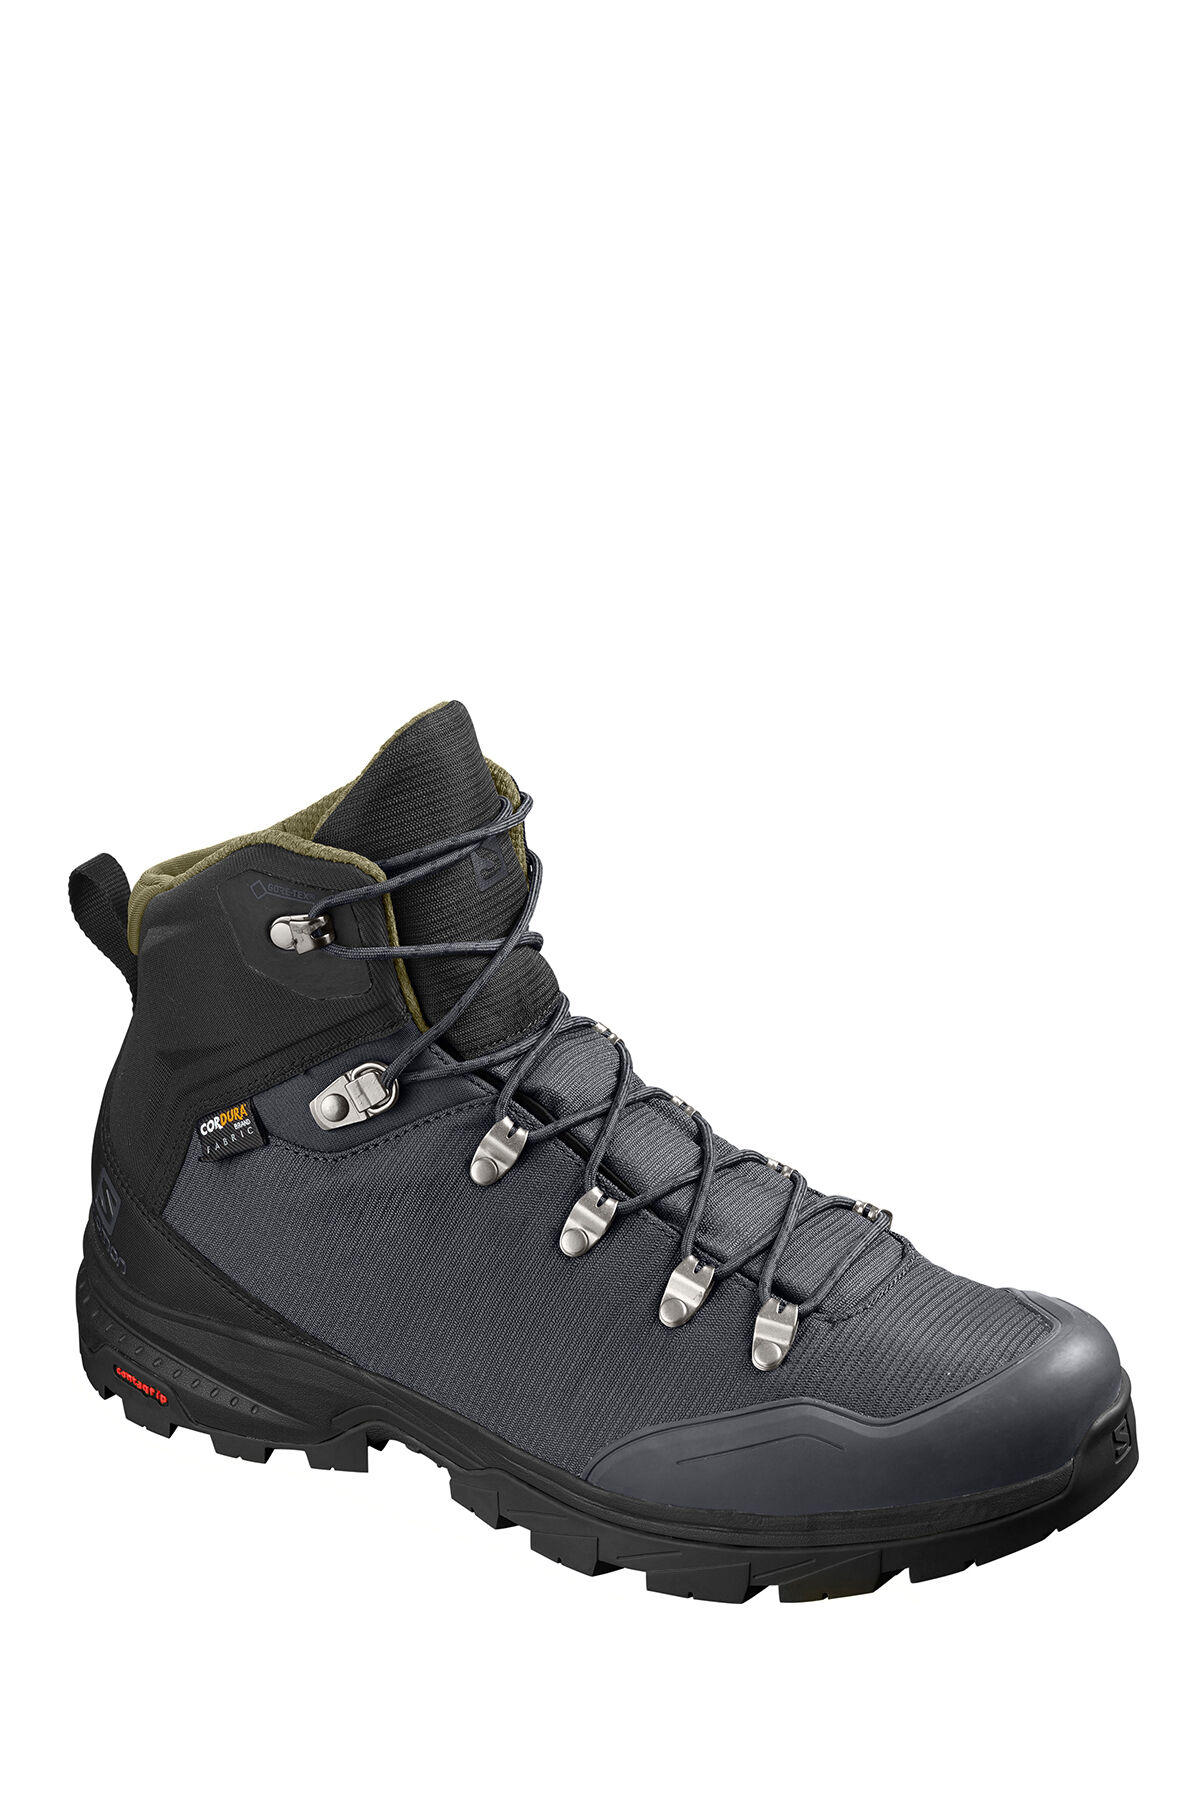 Top more than 160 salomon hiking shoes nz best